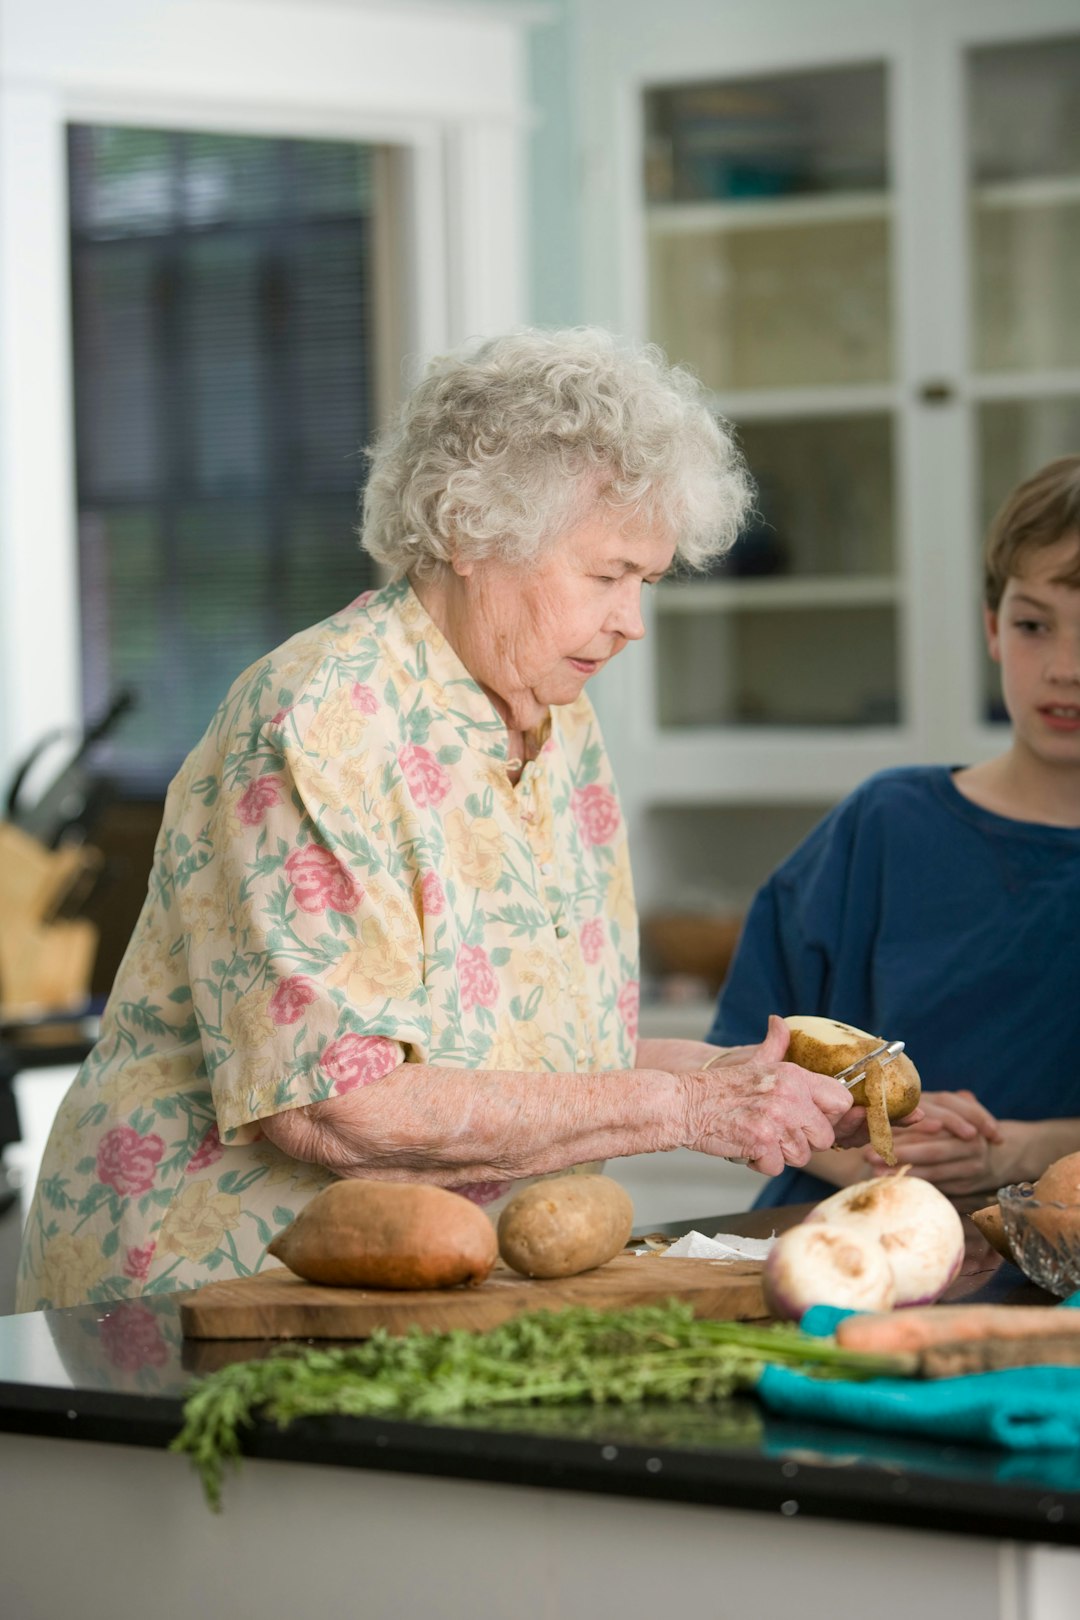 Live-In Care For Senior Loved Ones: 5 Things To Consider